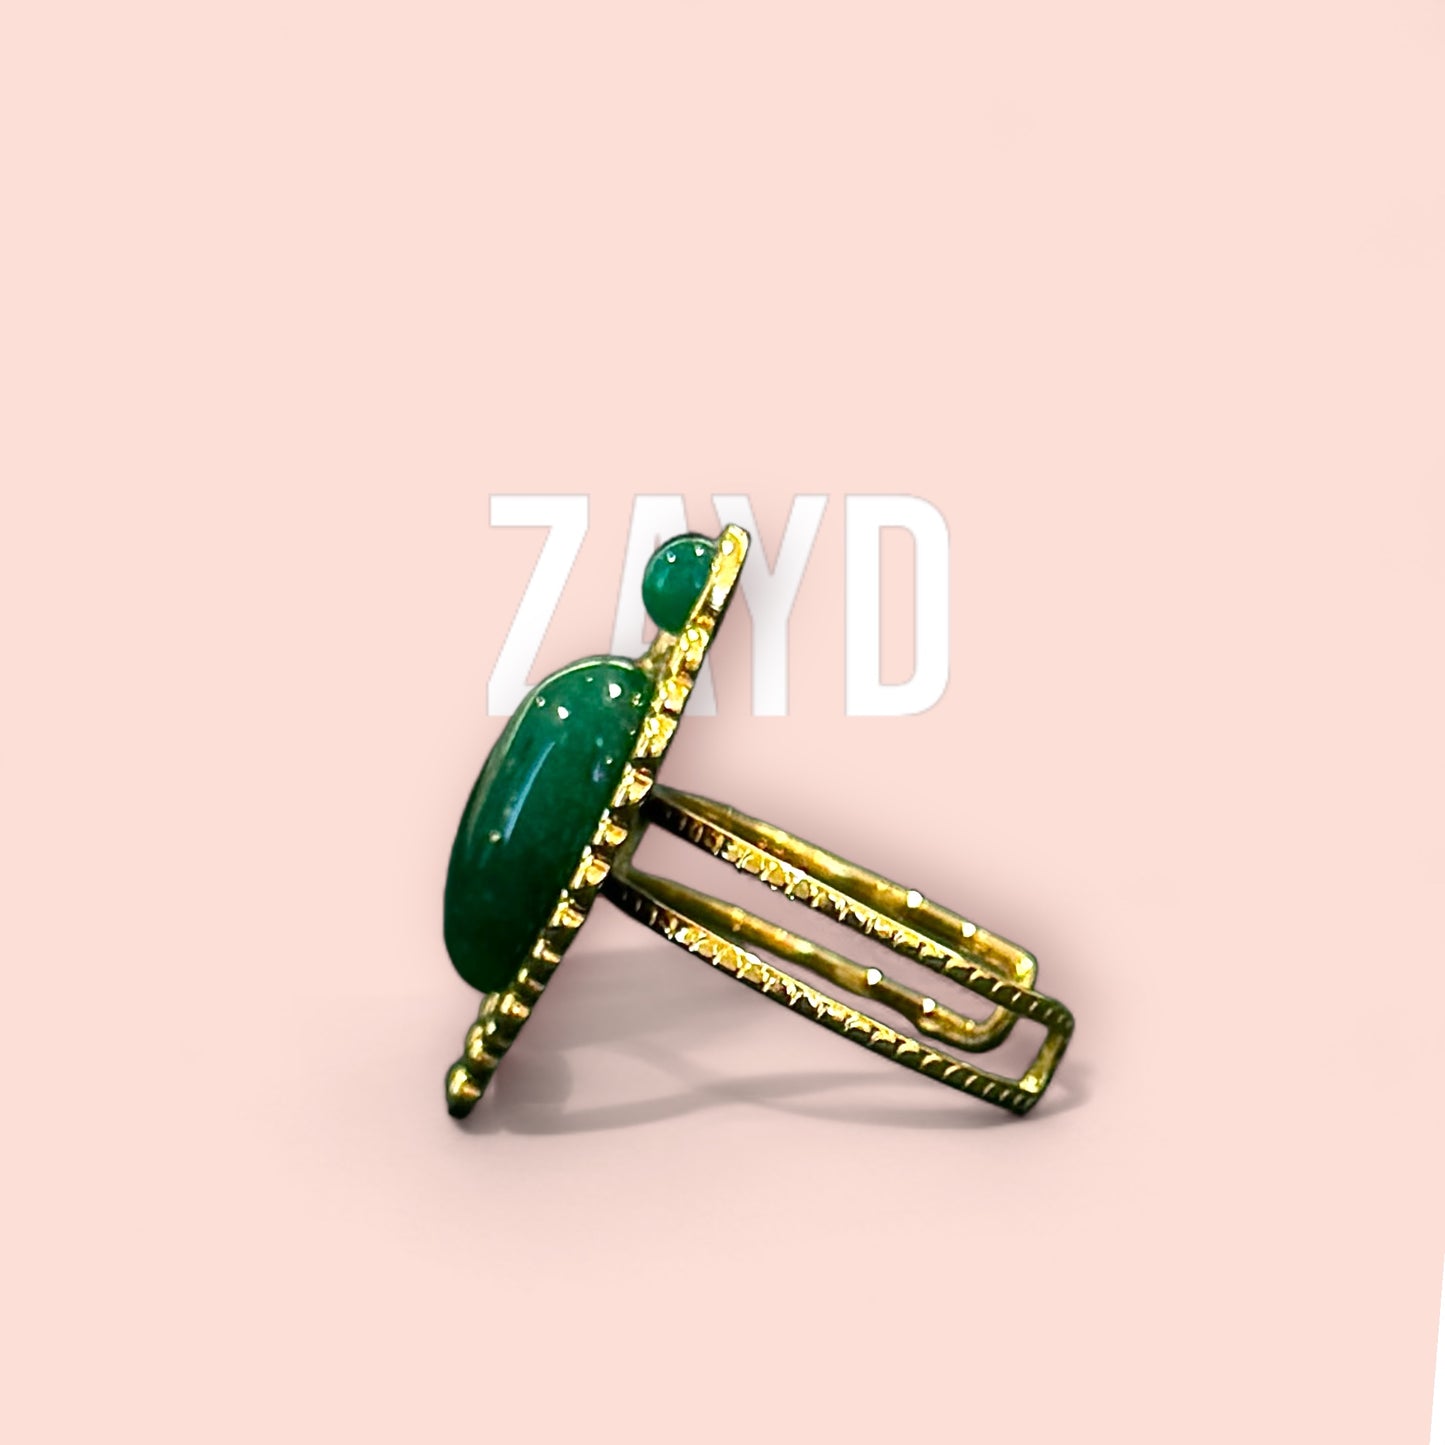 The ZAYD ring 